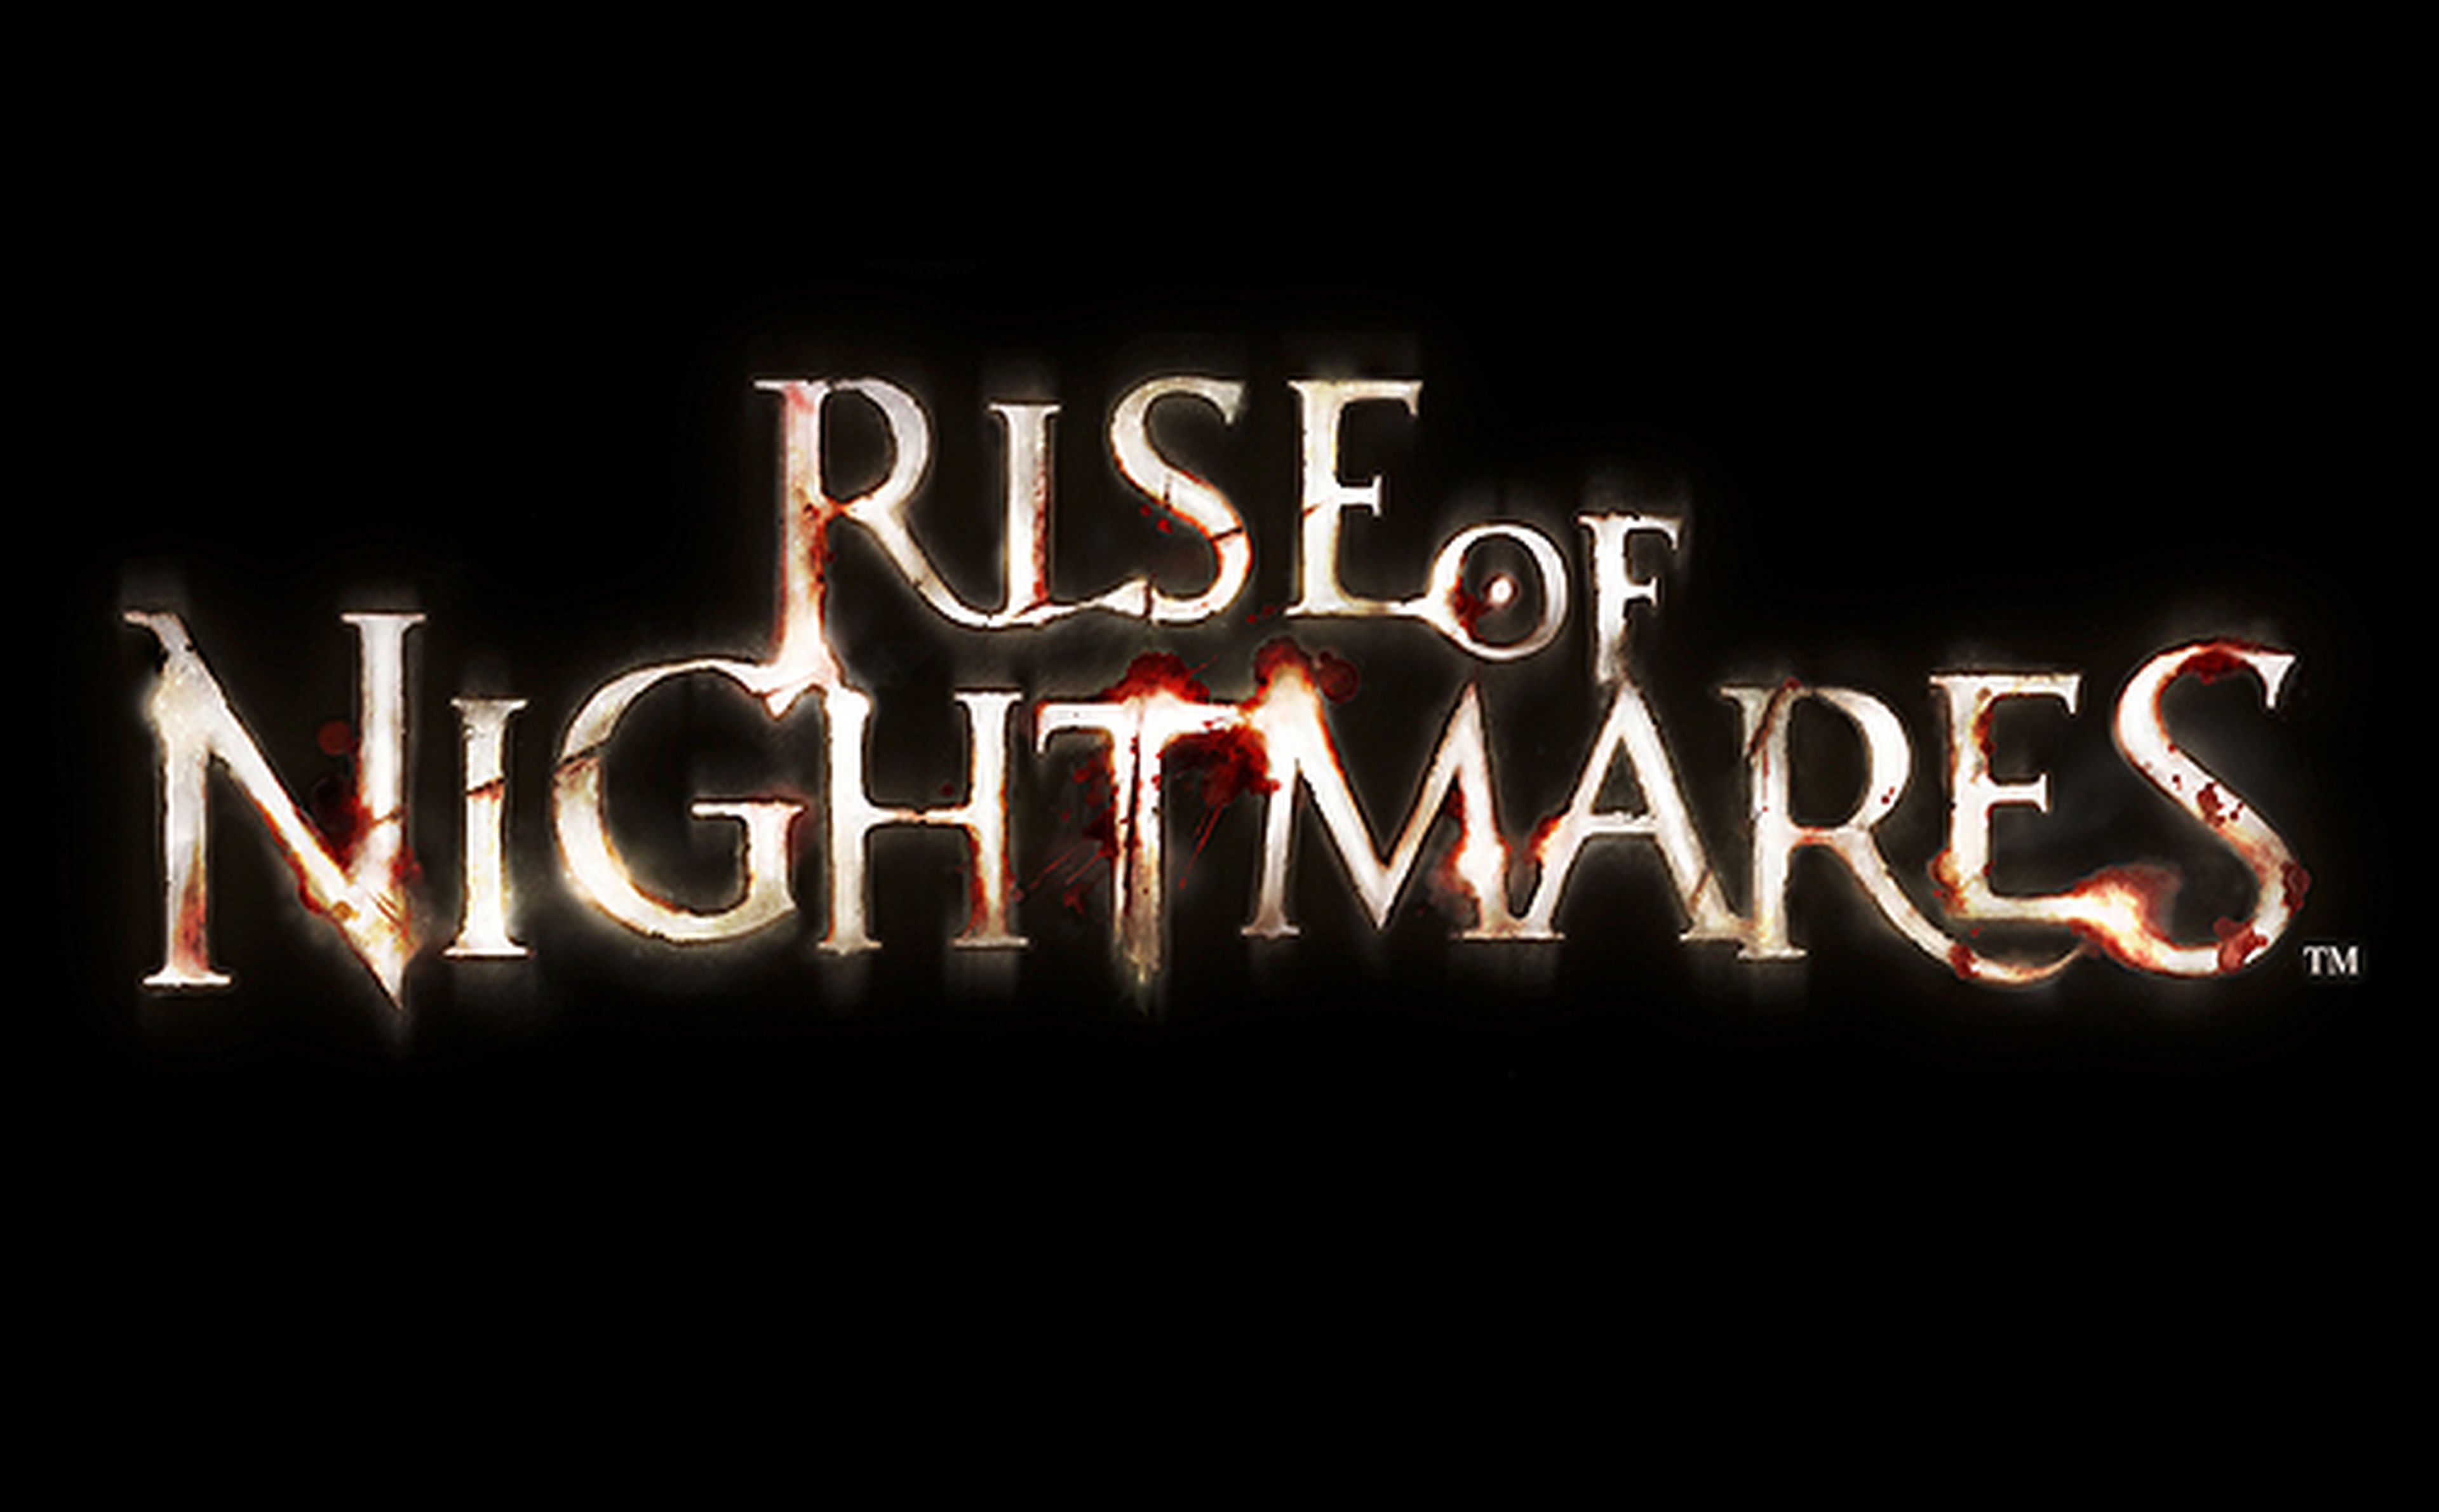 Rise of Nightmares para Kinect